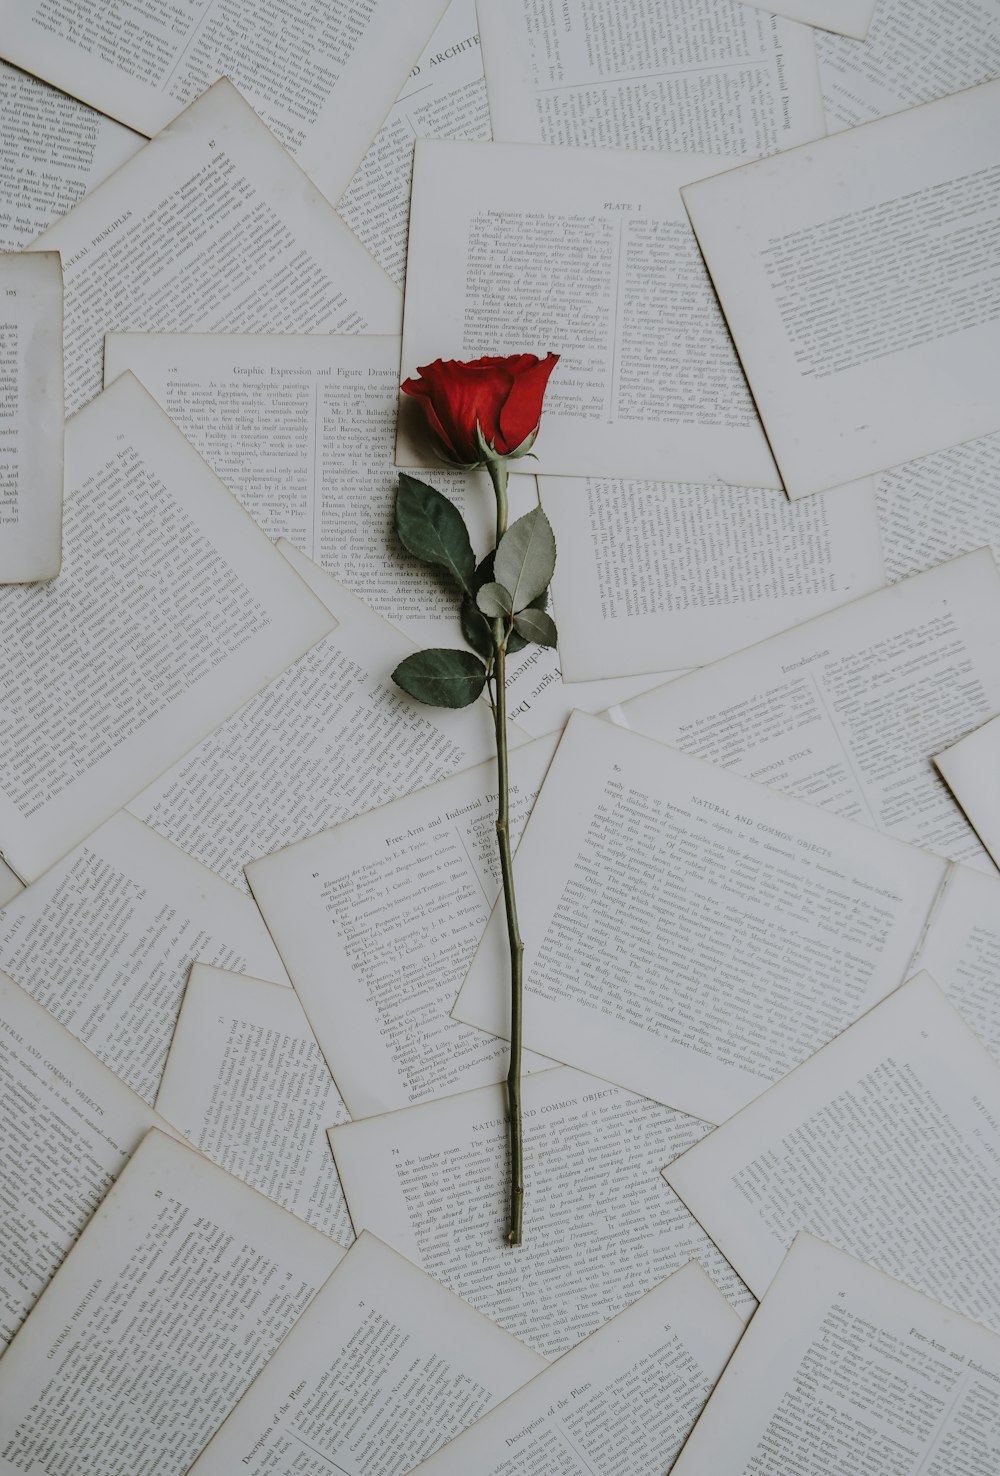 HQ] Rose On Book Pictures | Download Free Images on Unsplash